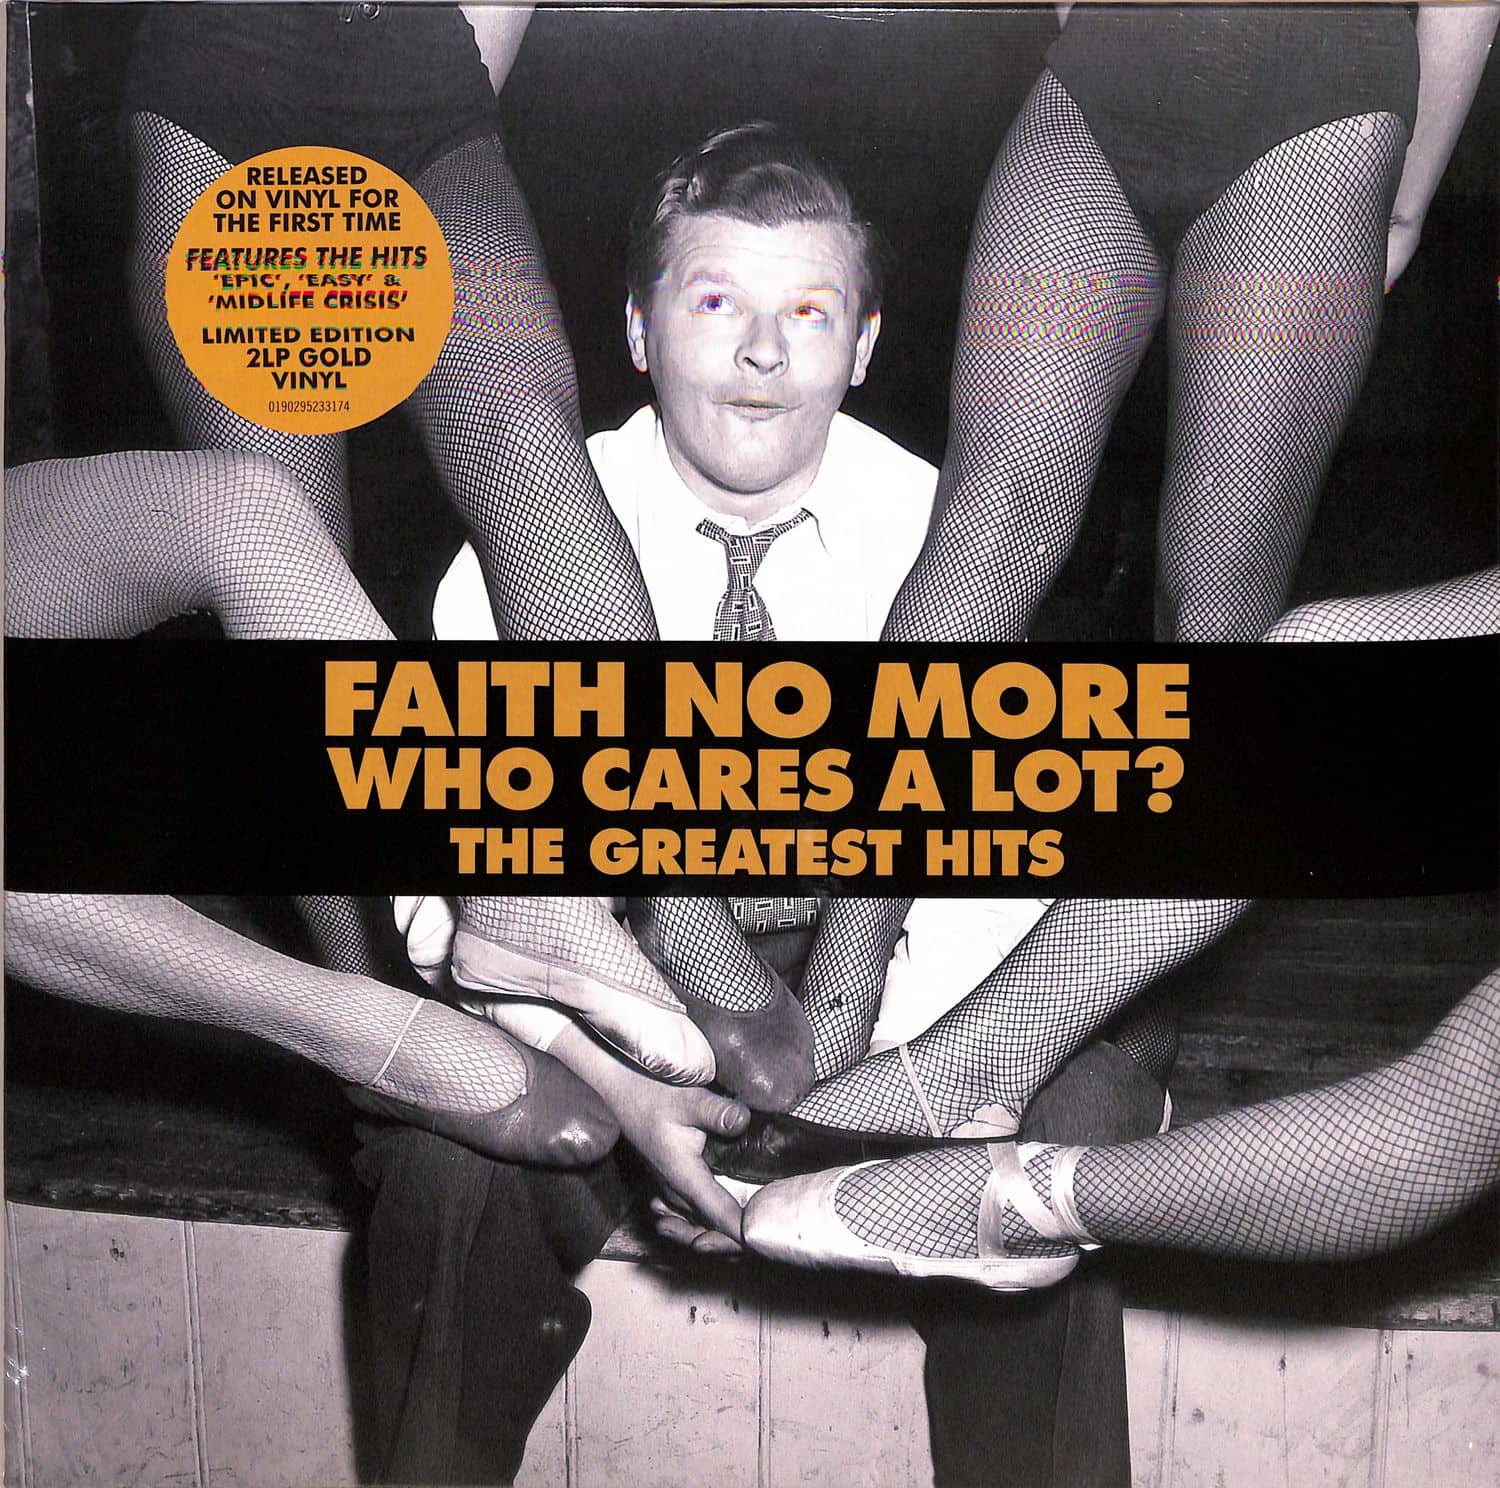 Faith No More - WHO CARES A LOT? THE GREATEST HITS 